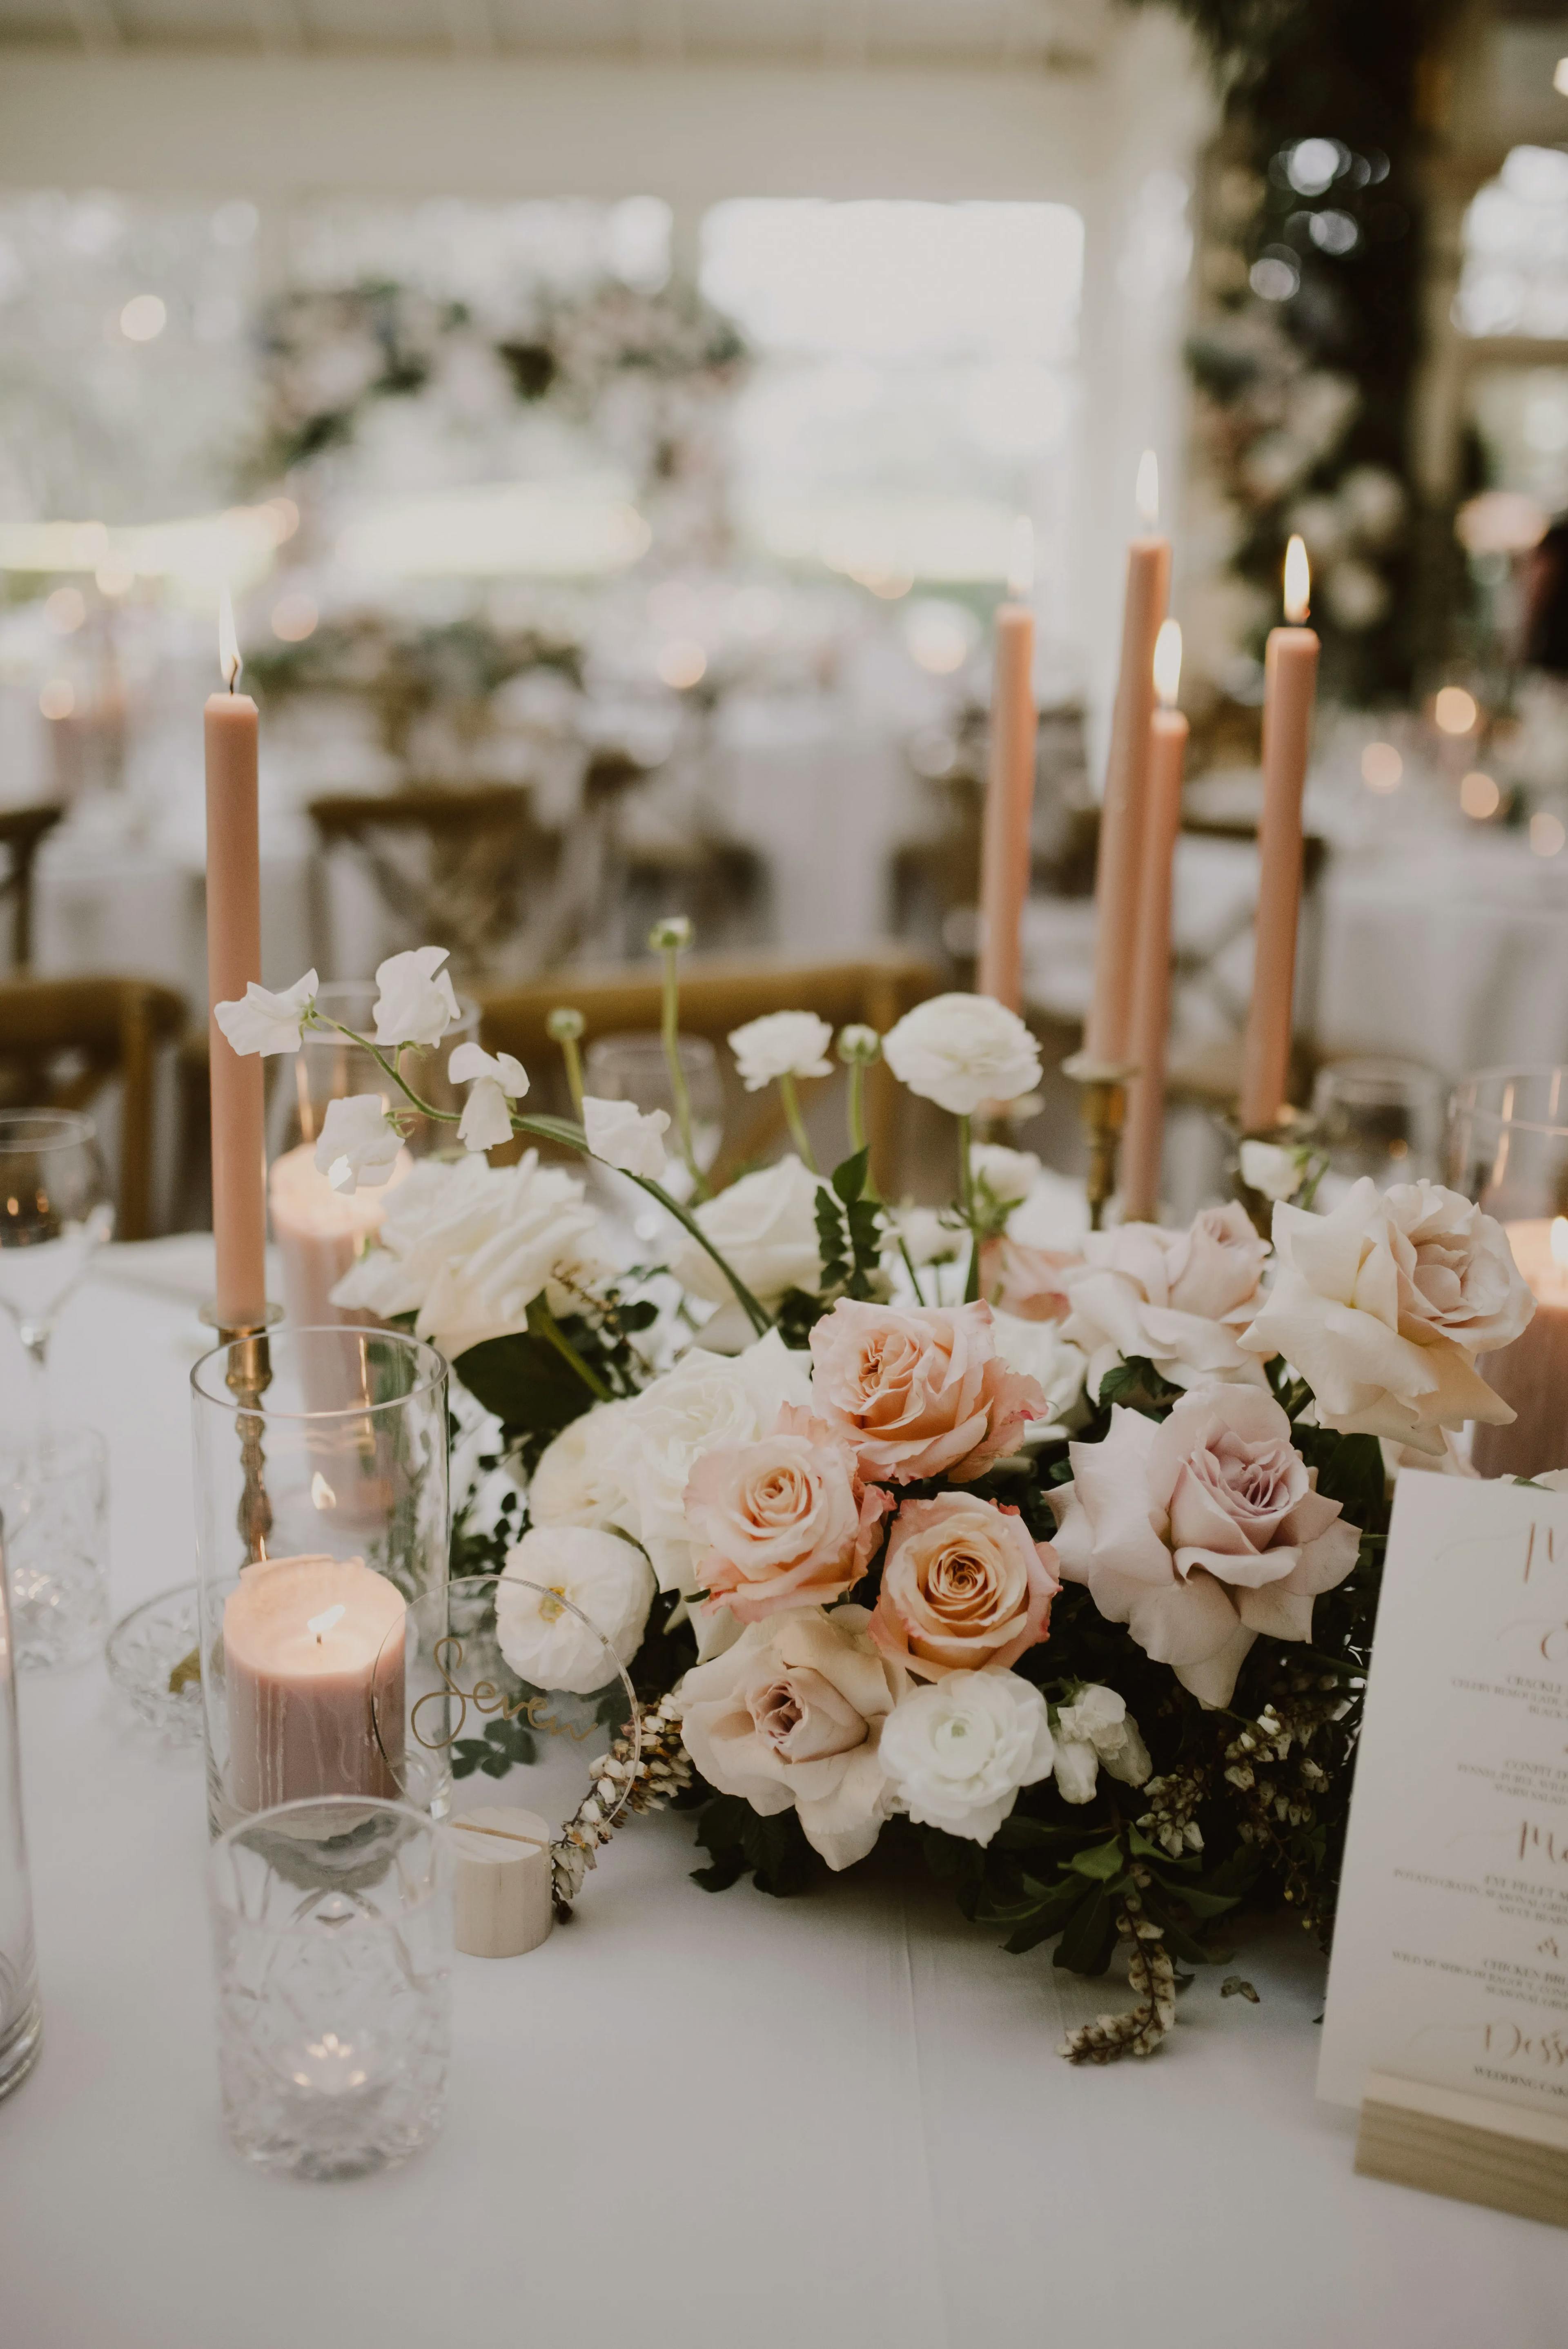 A beautifully arranged table centerpiece features light pink and white roses, lush greenery, and tall, lit pink taper candles in glass holders, creating an elegant and romantic ambiance at an event. The table is set with more roses and candles, enhancing the decor.